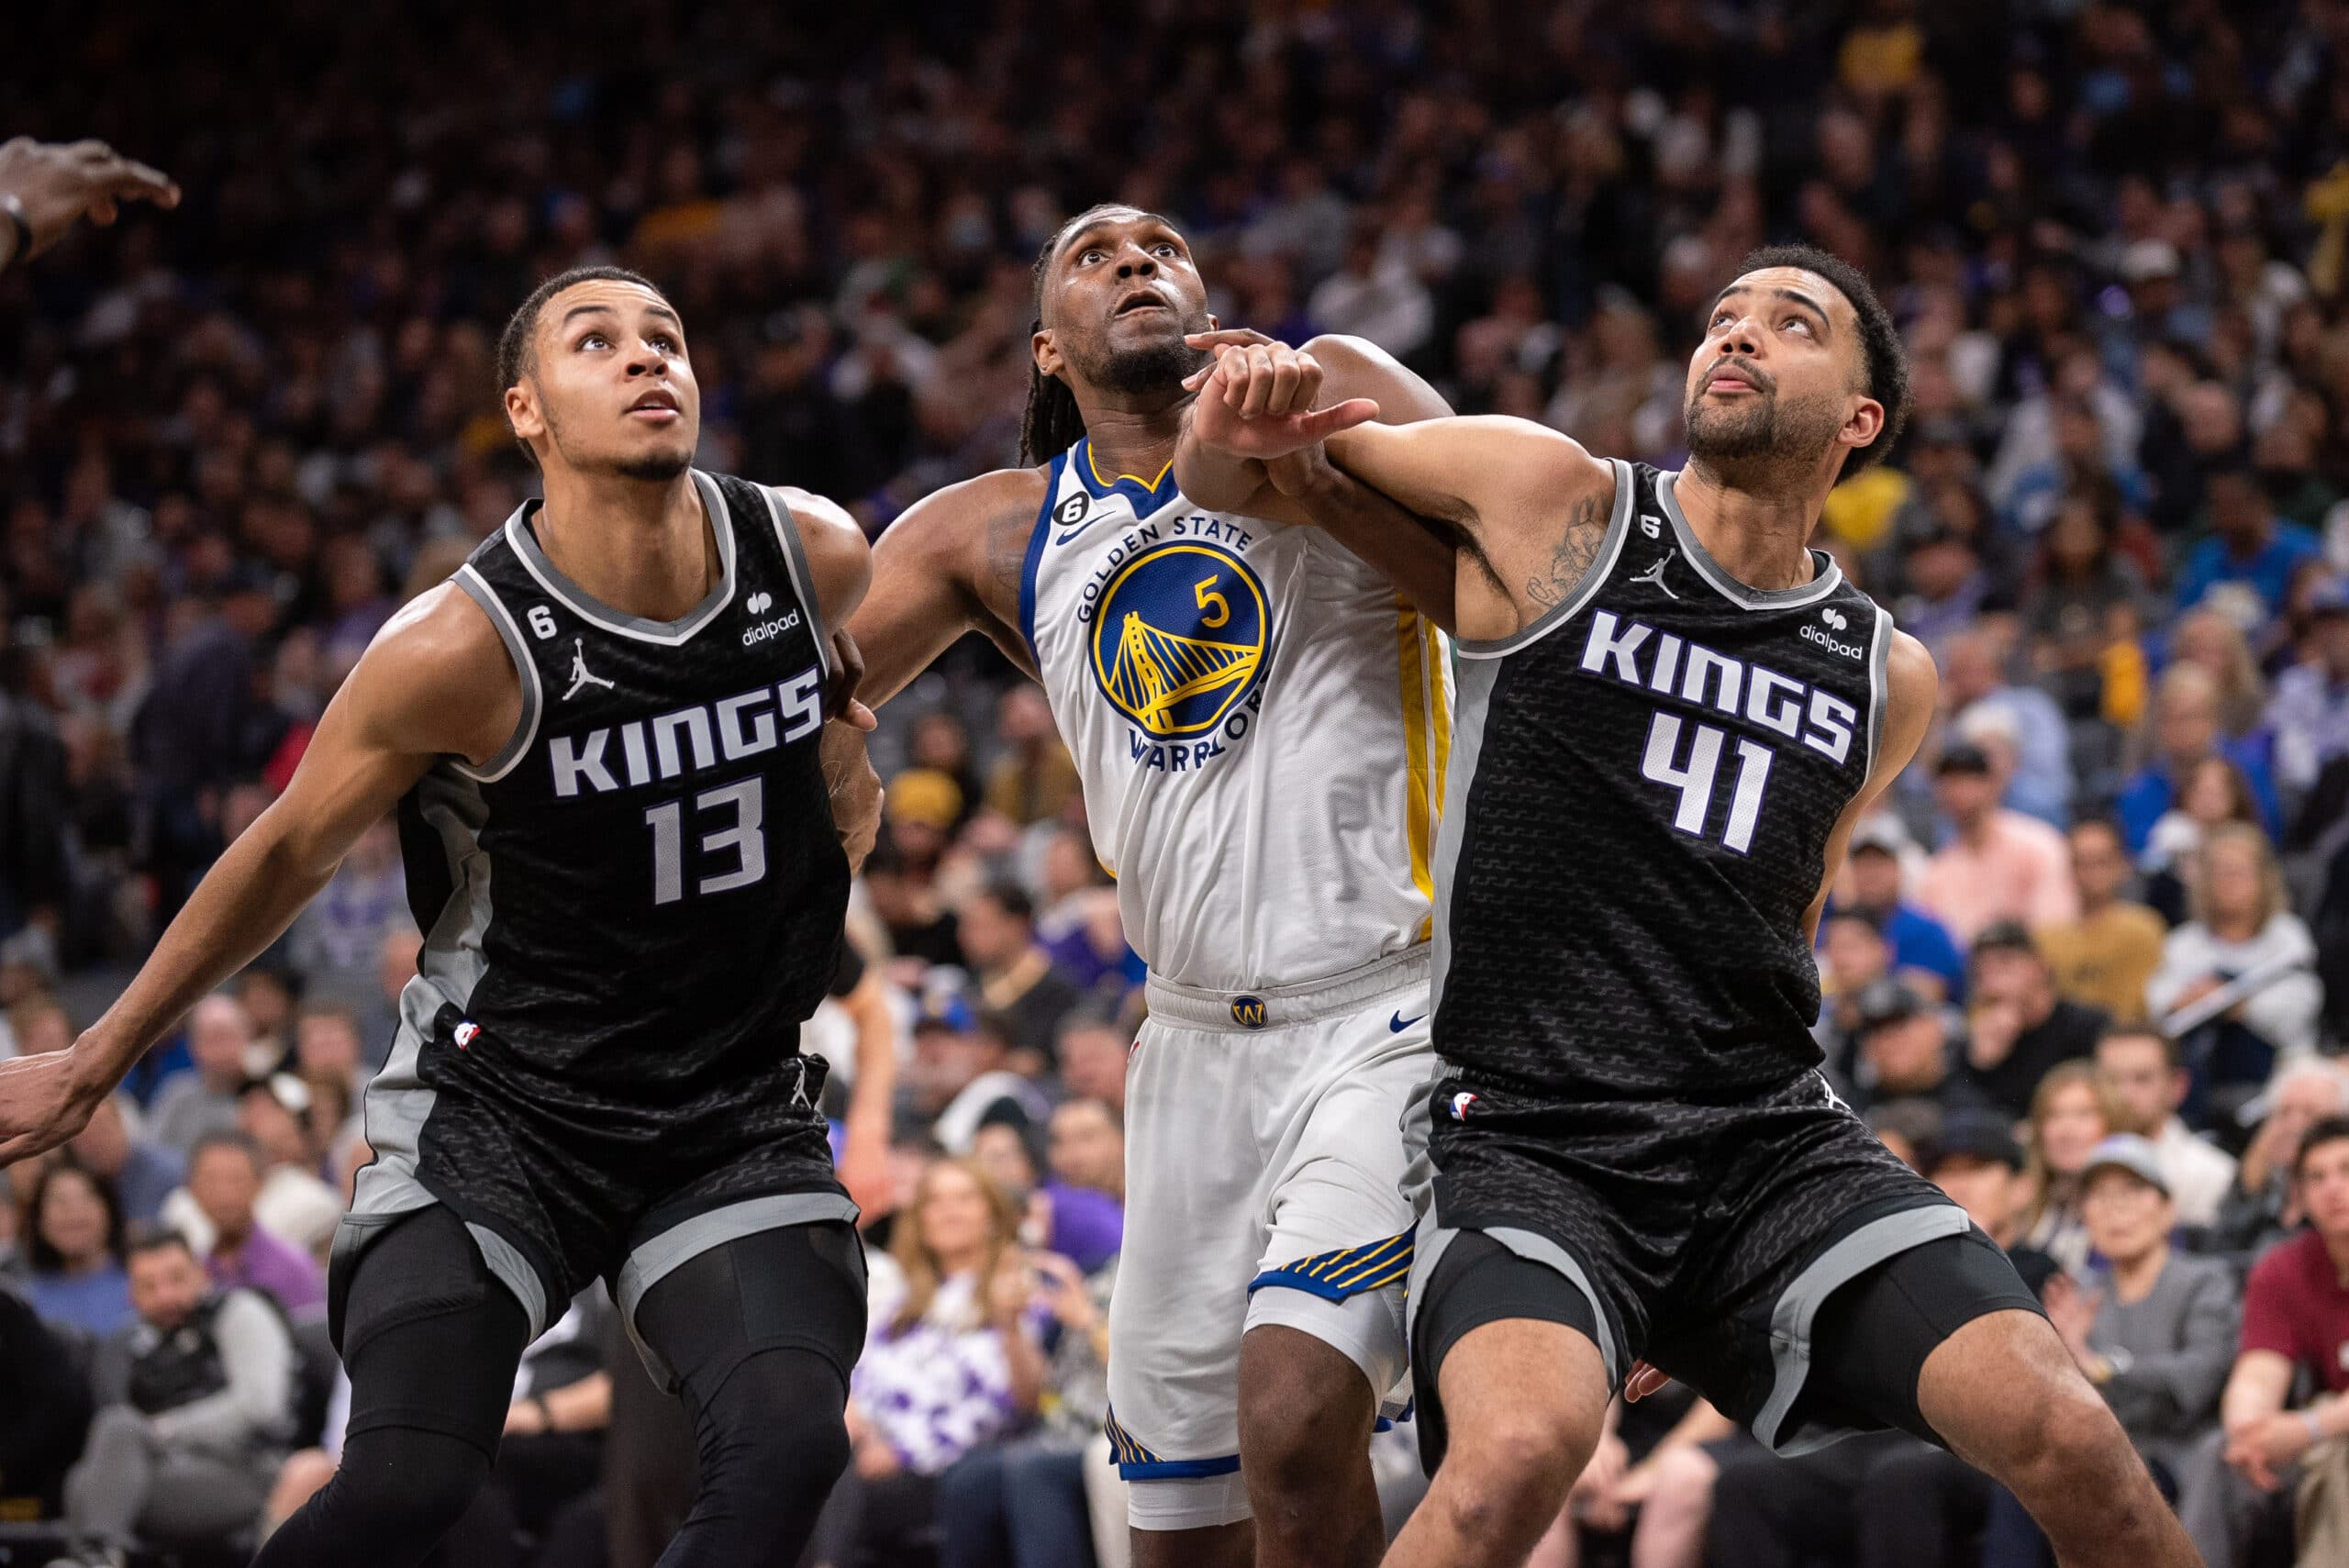 Warriors-Kings playoffs: Tickets nearly twice as pricey in Sacramento